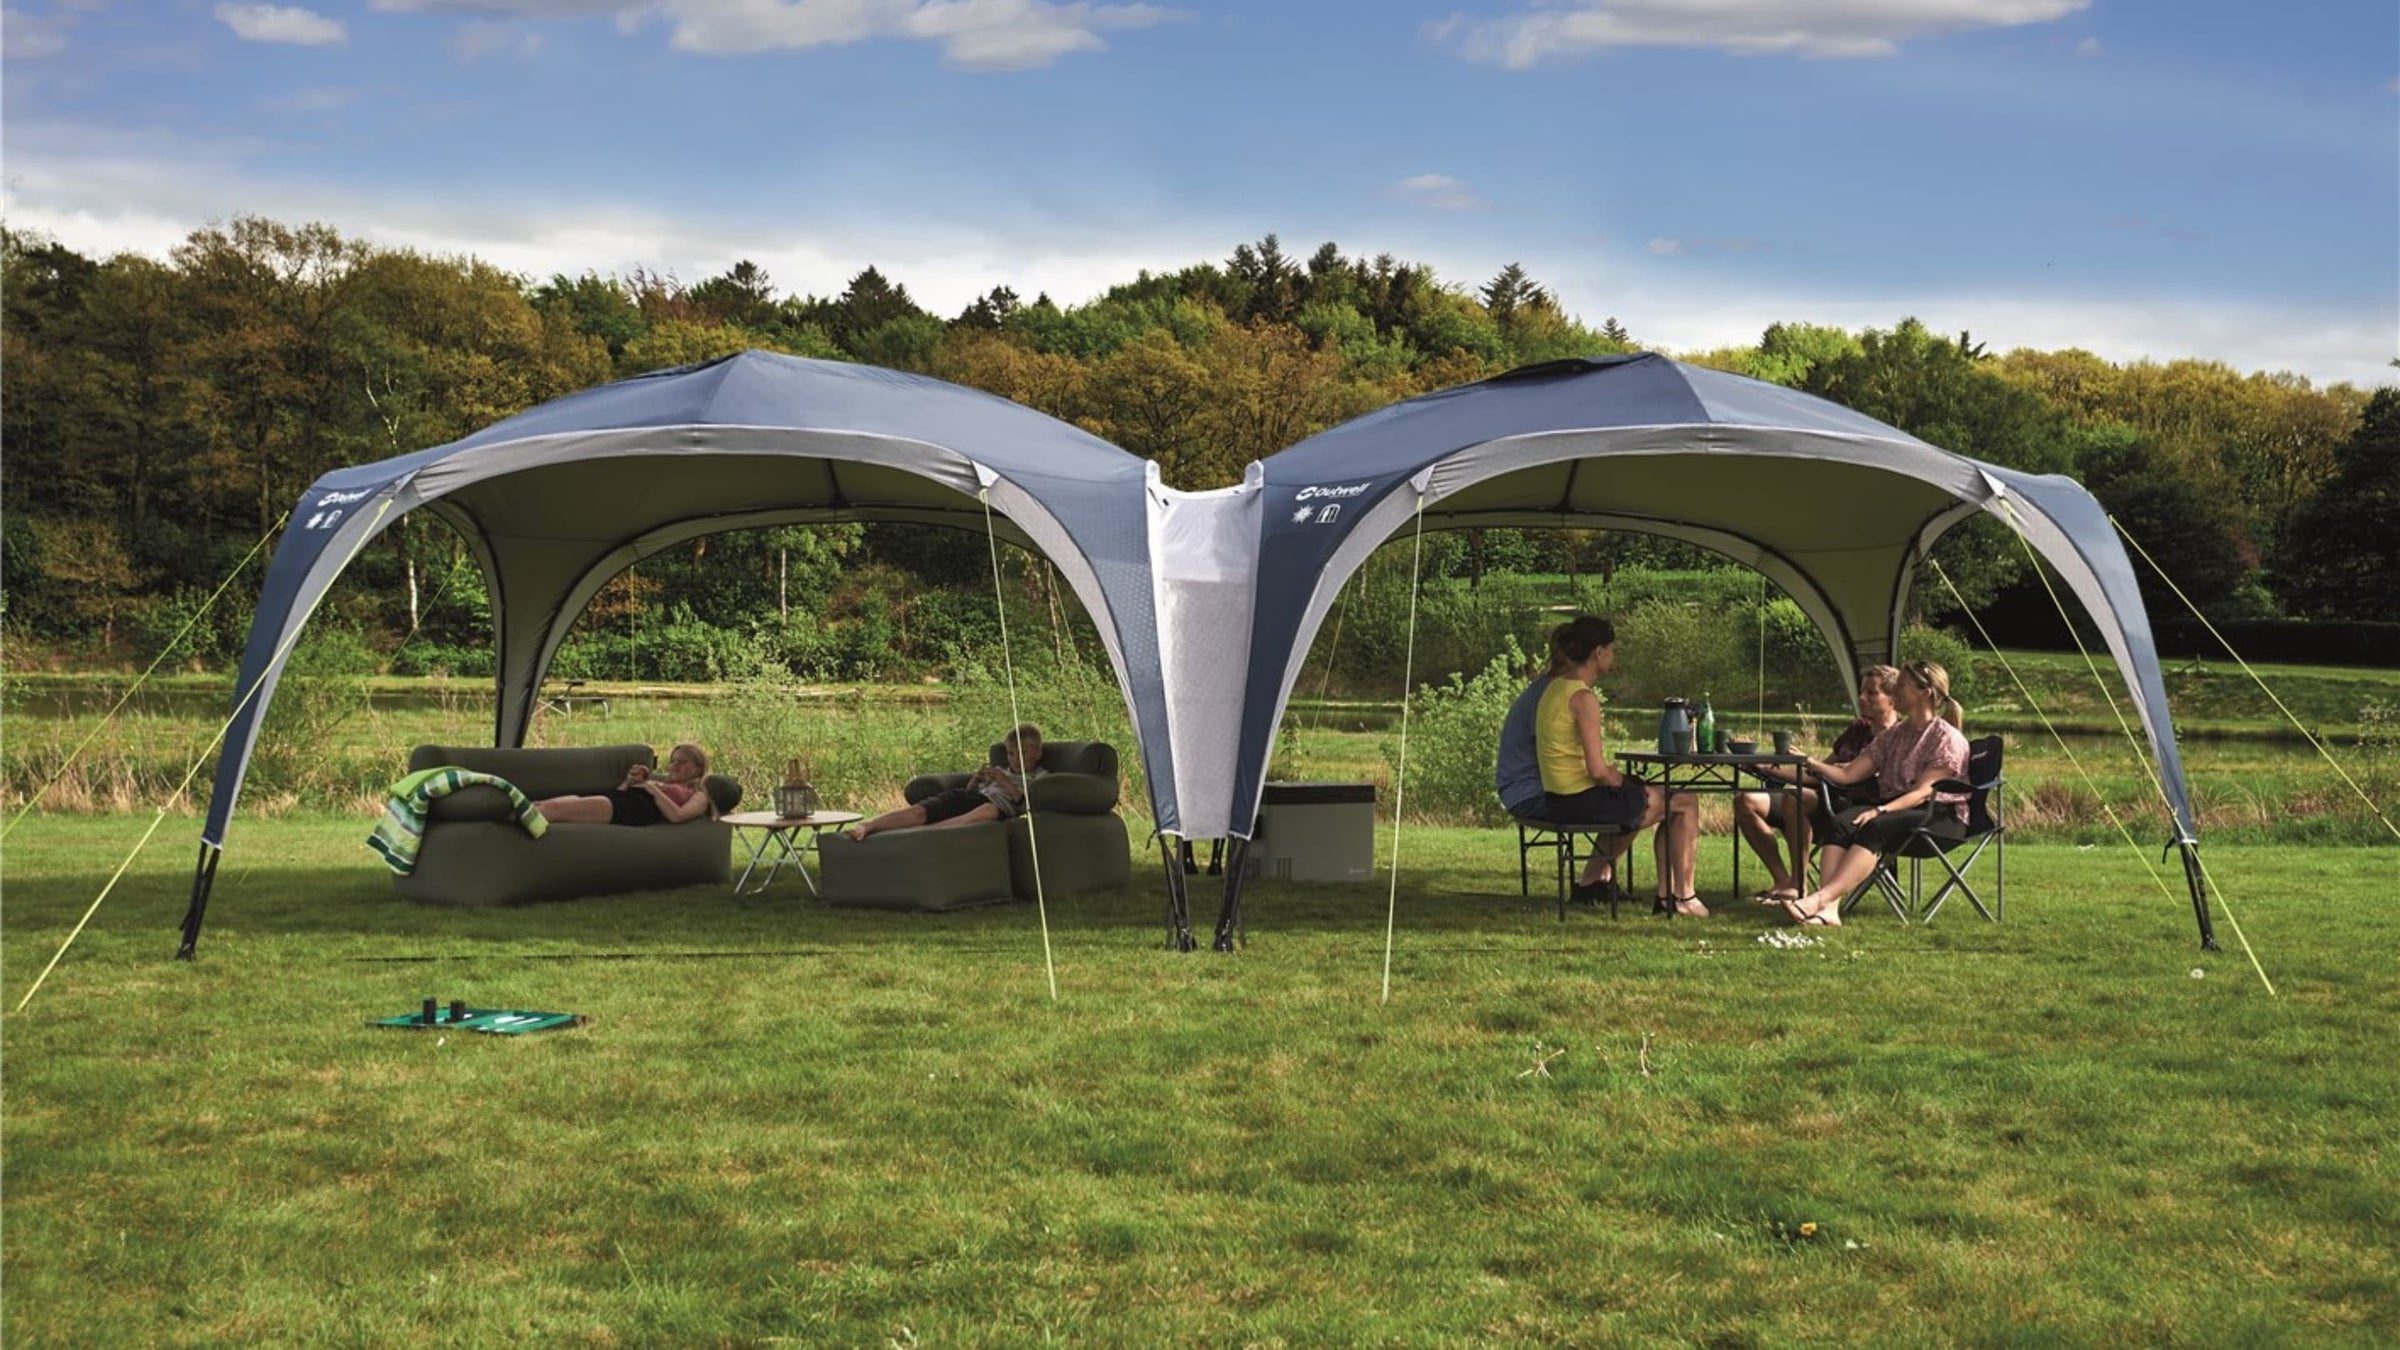 Camping Gazebos & Shelters from Outwell various sizes